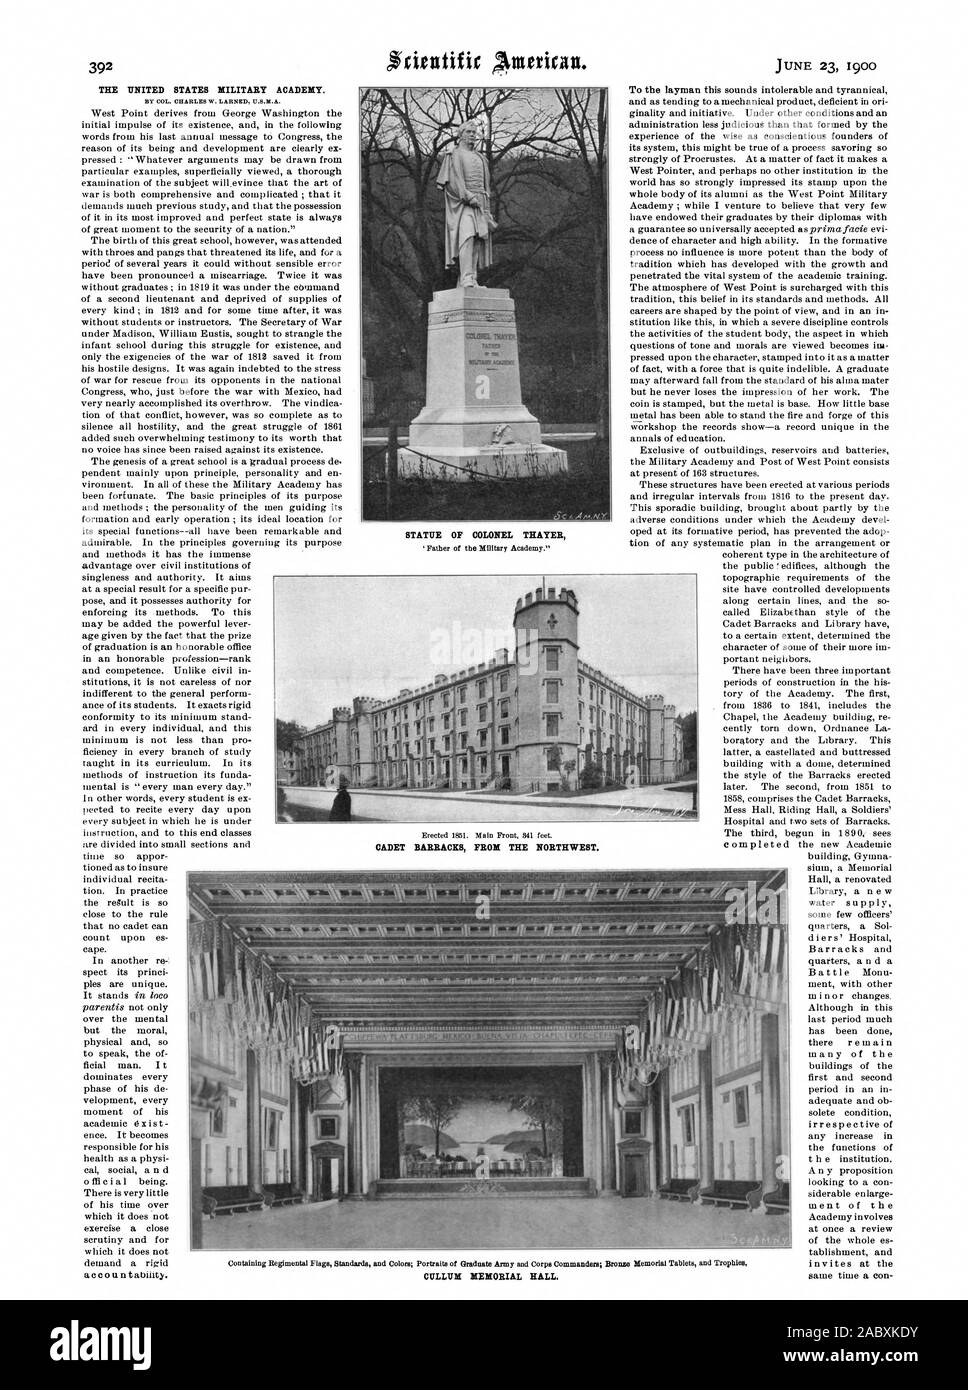 THE UNITED STATES MILITARY ACADEMY. BY COL. CHARLES W. LARNED U.S.M.A. STATUE OF COLONEL THAYER CADET BARRACKS FROM THE NORTHWEST., scientific american, 1900-06-23 Stock Photo